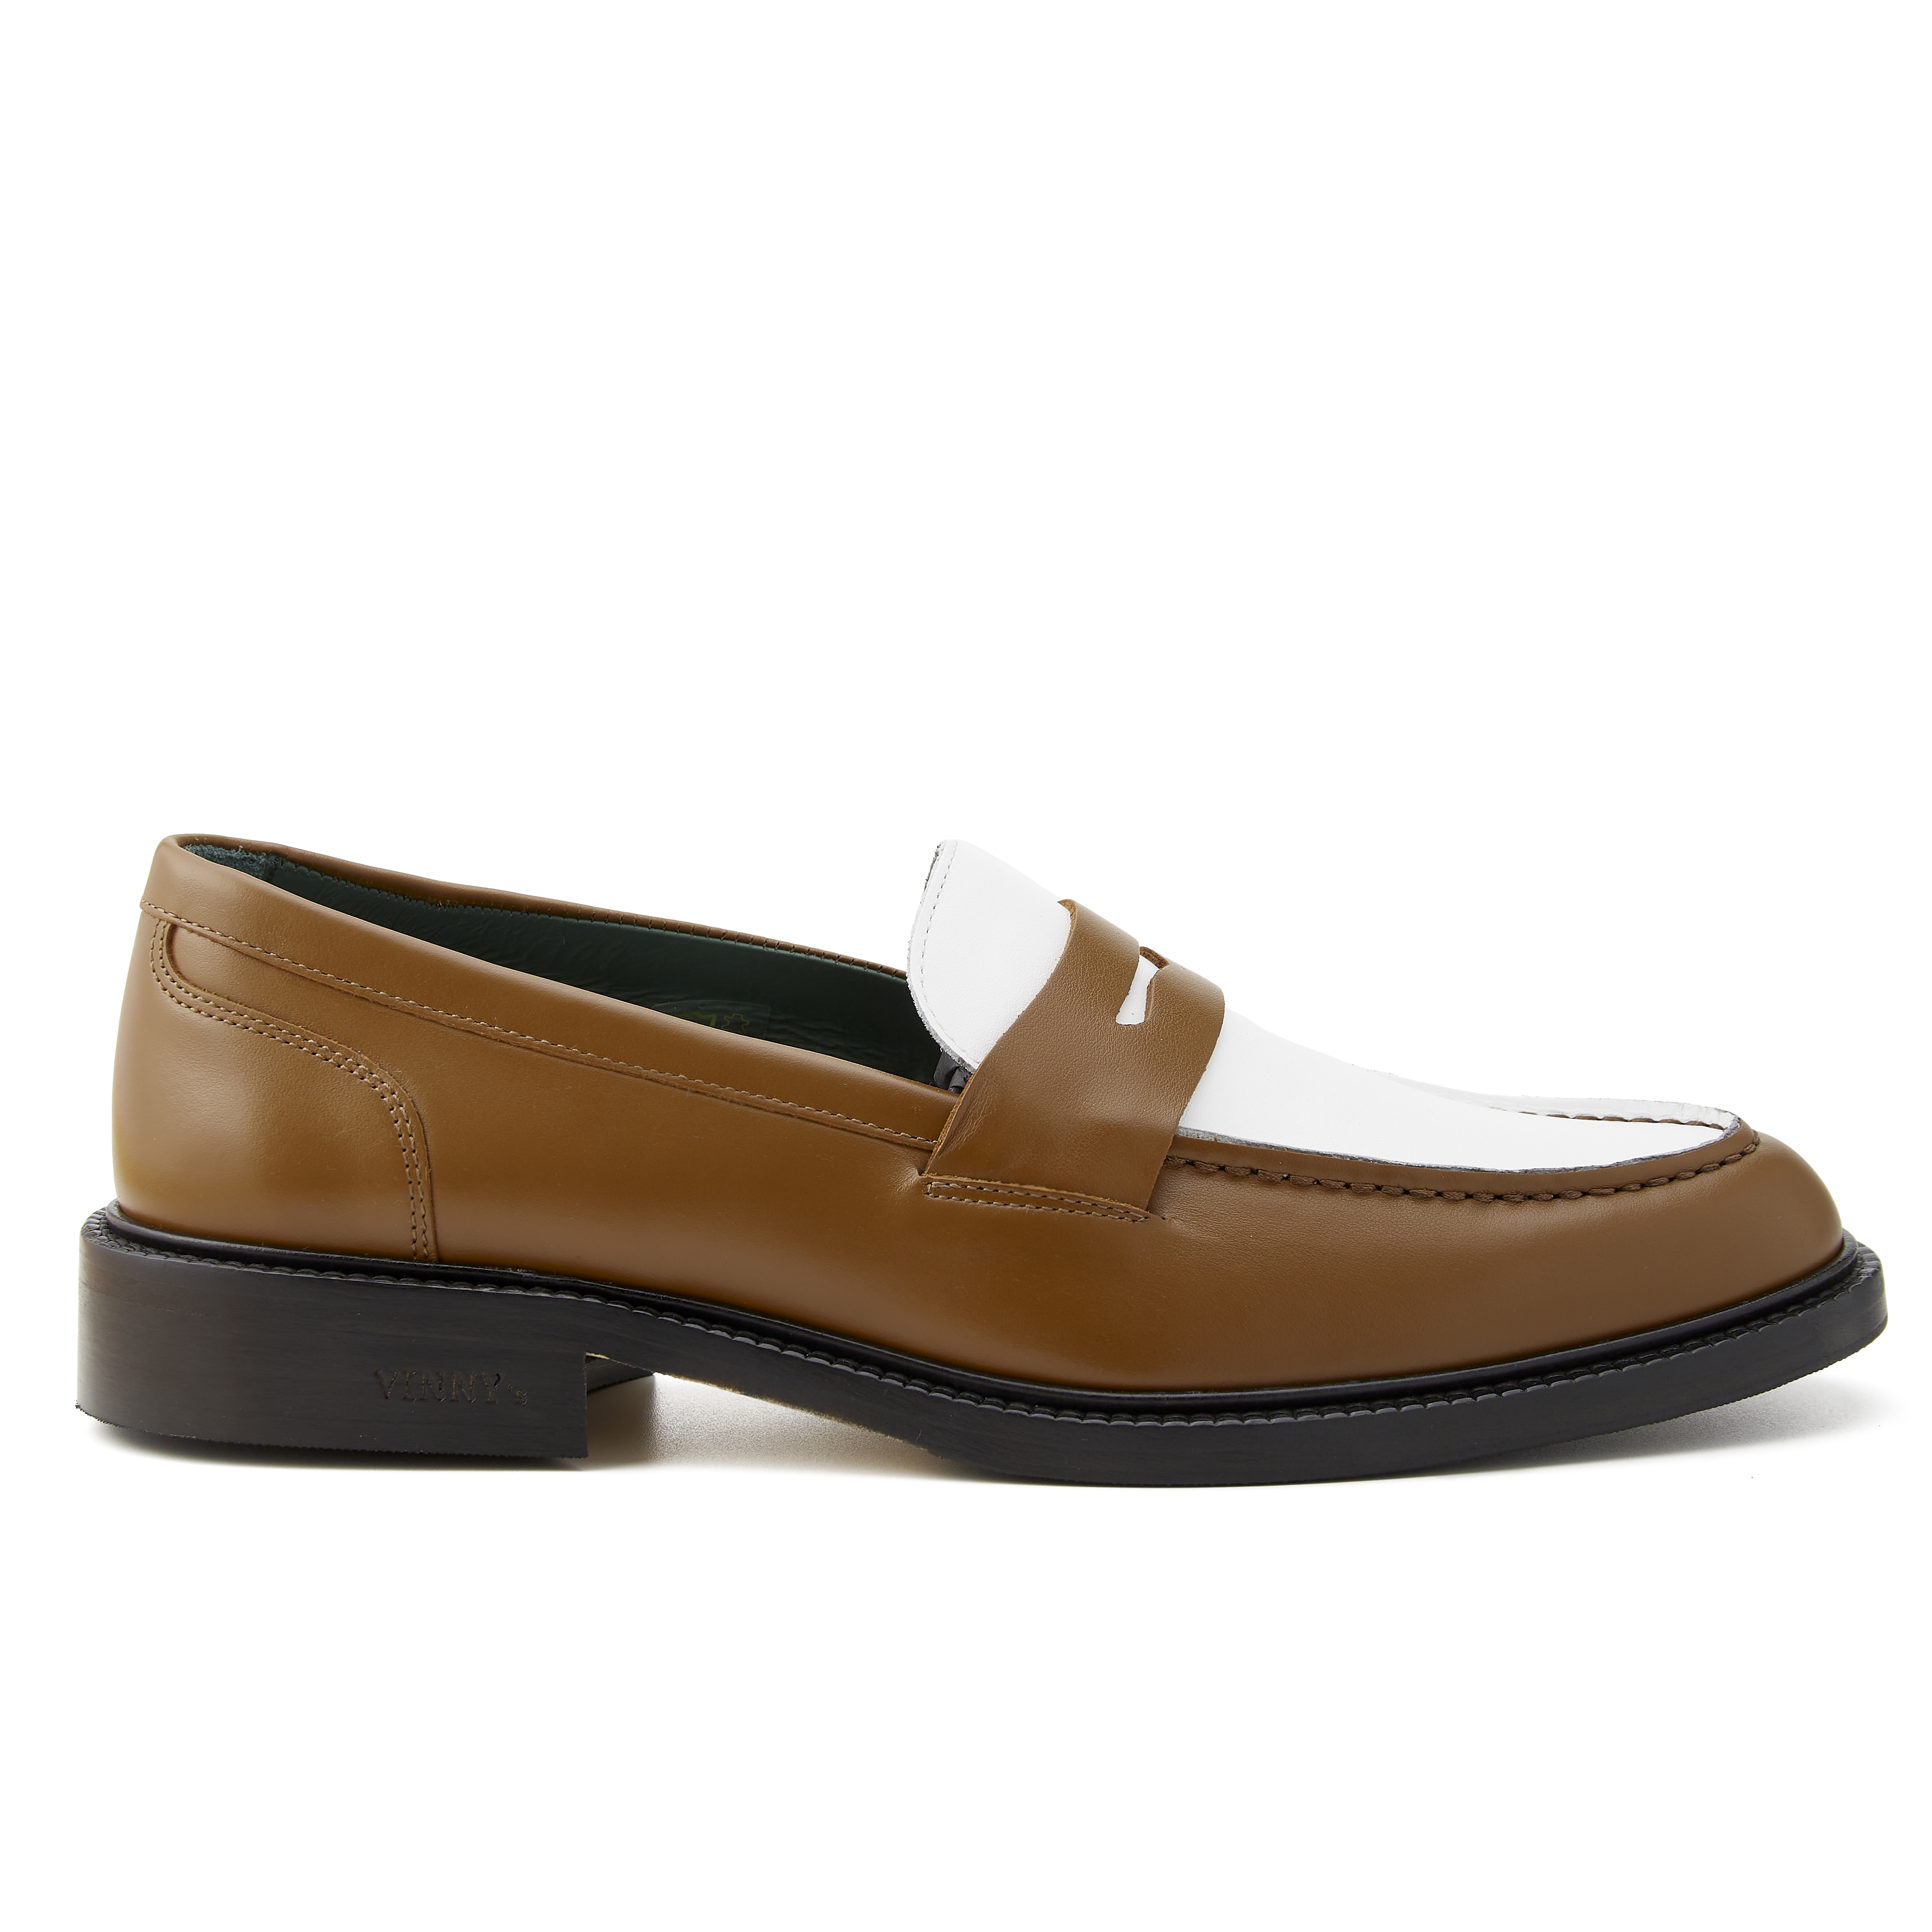 Vinny's Townee Two-Tone Penny Loafer - Cognac Leather | Loafers 